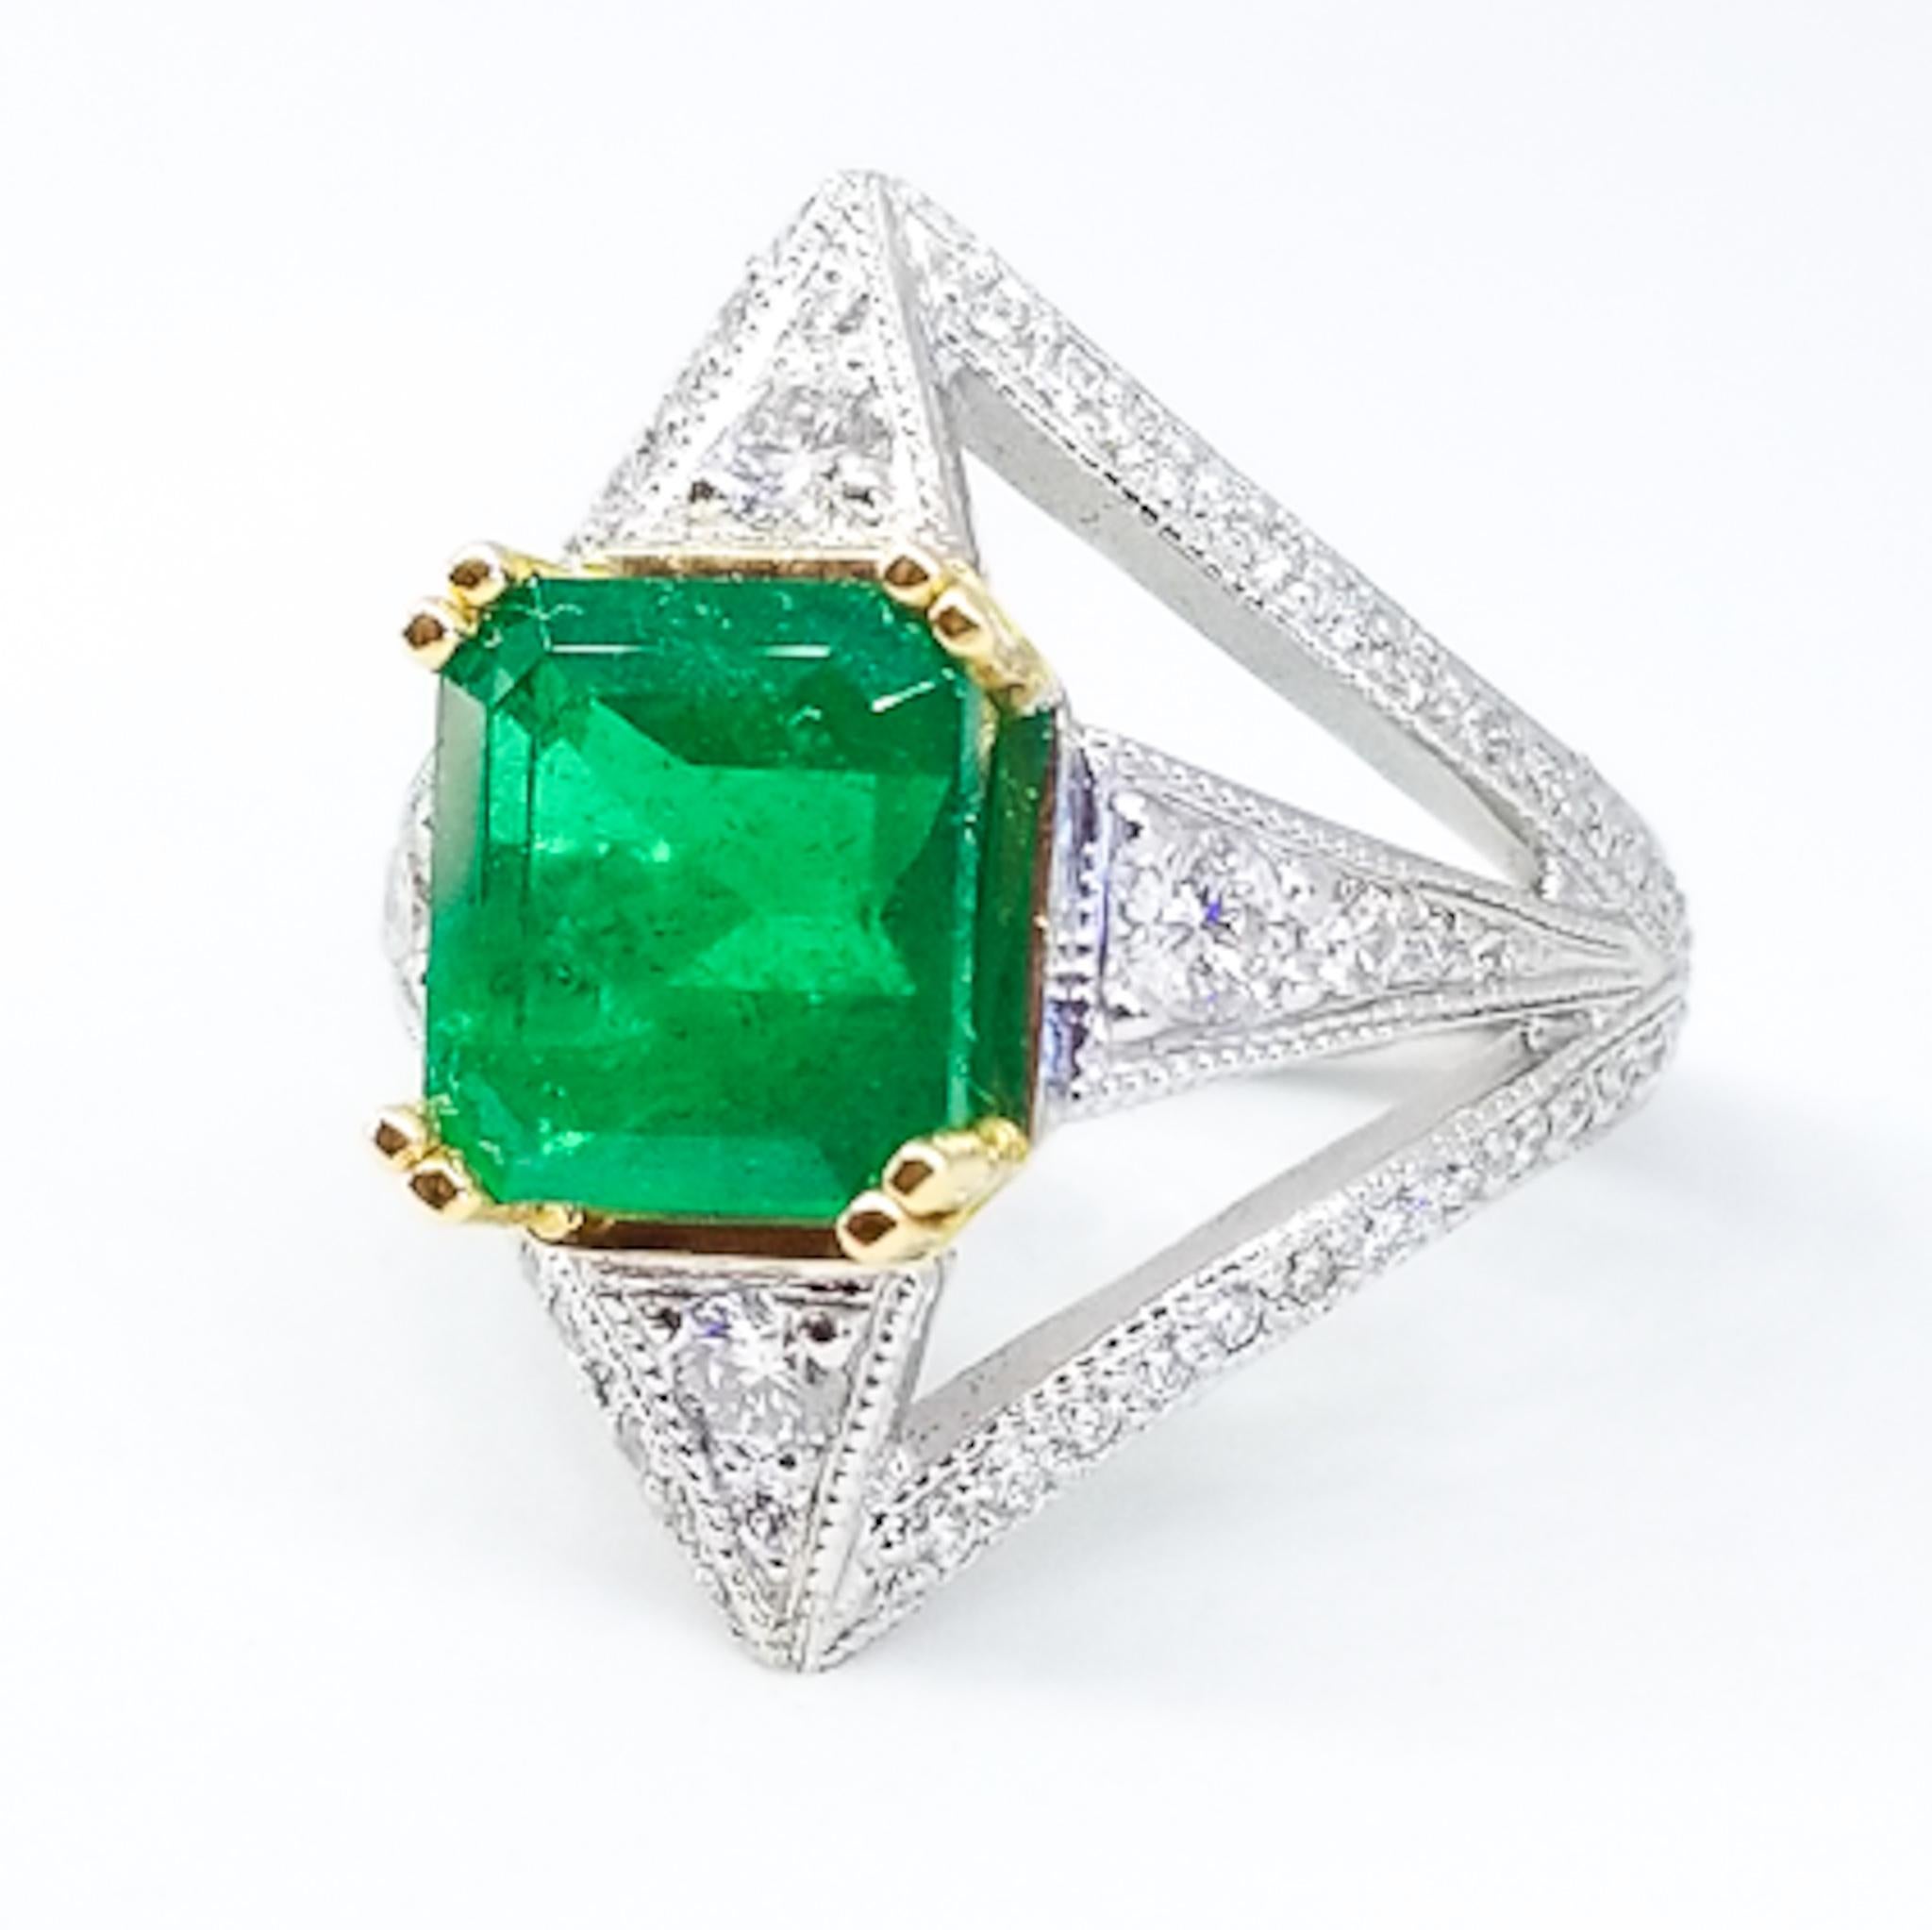 This Custom Designed, One of a Kind Statement Ring by Tom Castor features a Very Fine Colombian Emerald of 3.26 Carat. The Square Cut stone is of rich Grass Green Color and exceptional Gem Clarity. The ring was specifically designed for this fine